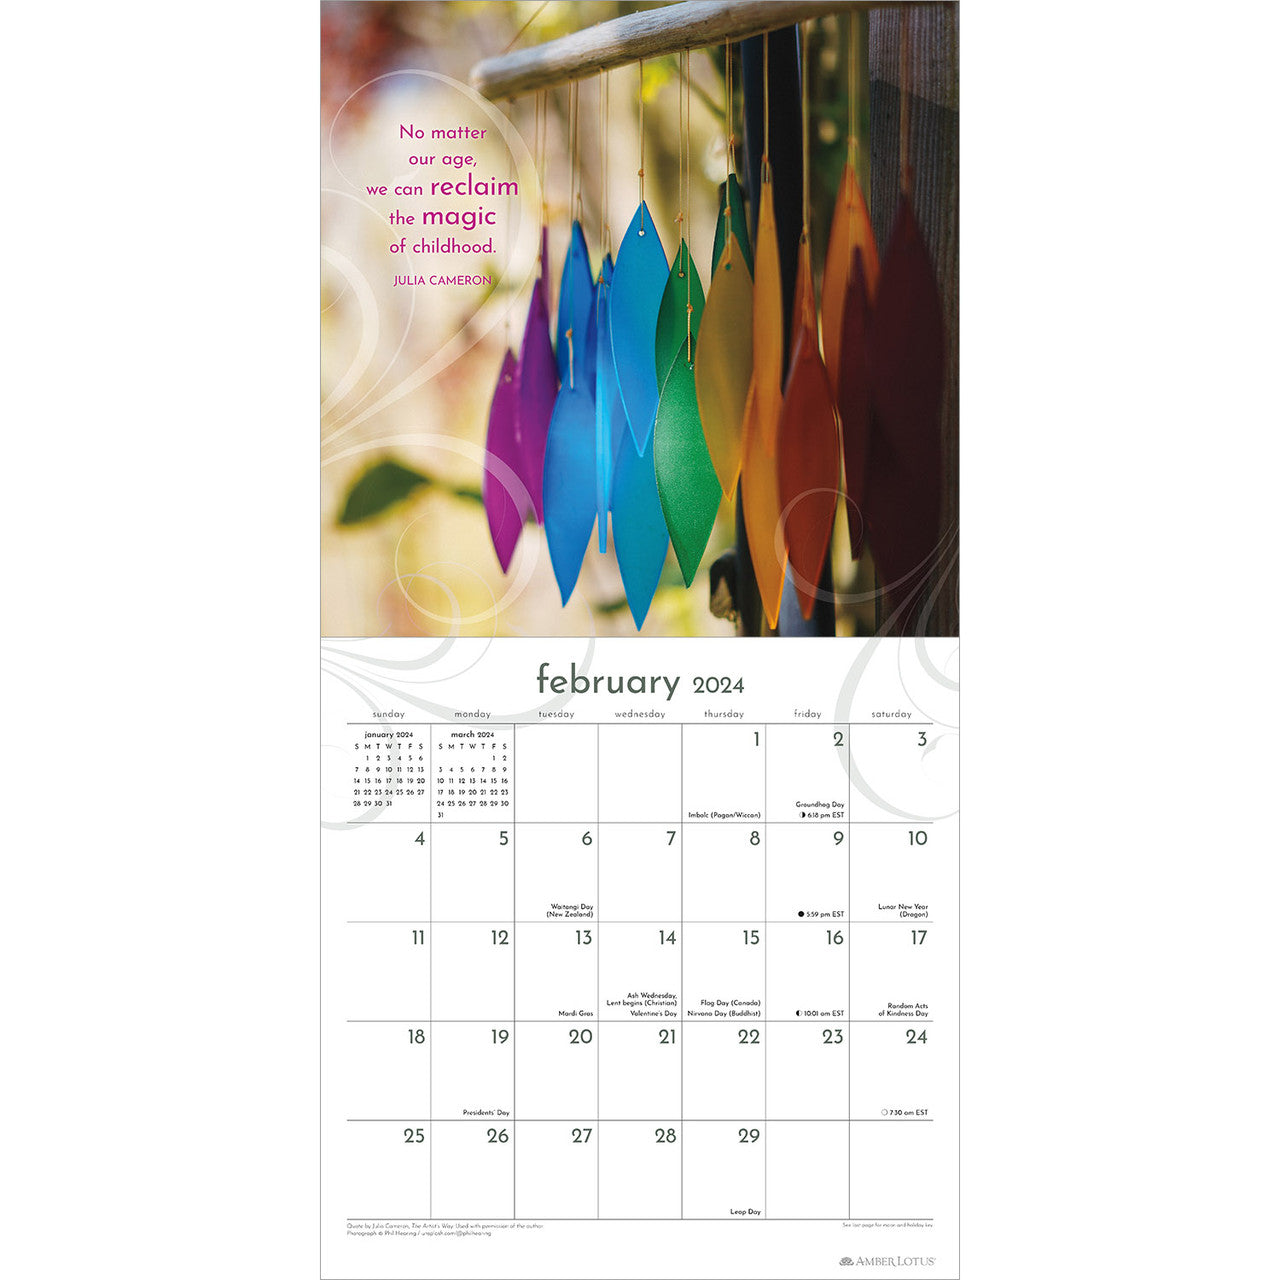 2024 A Year of Mindful Living - Square Wall Calendar